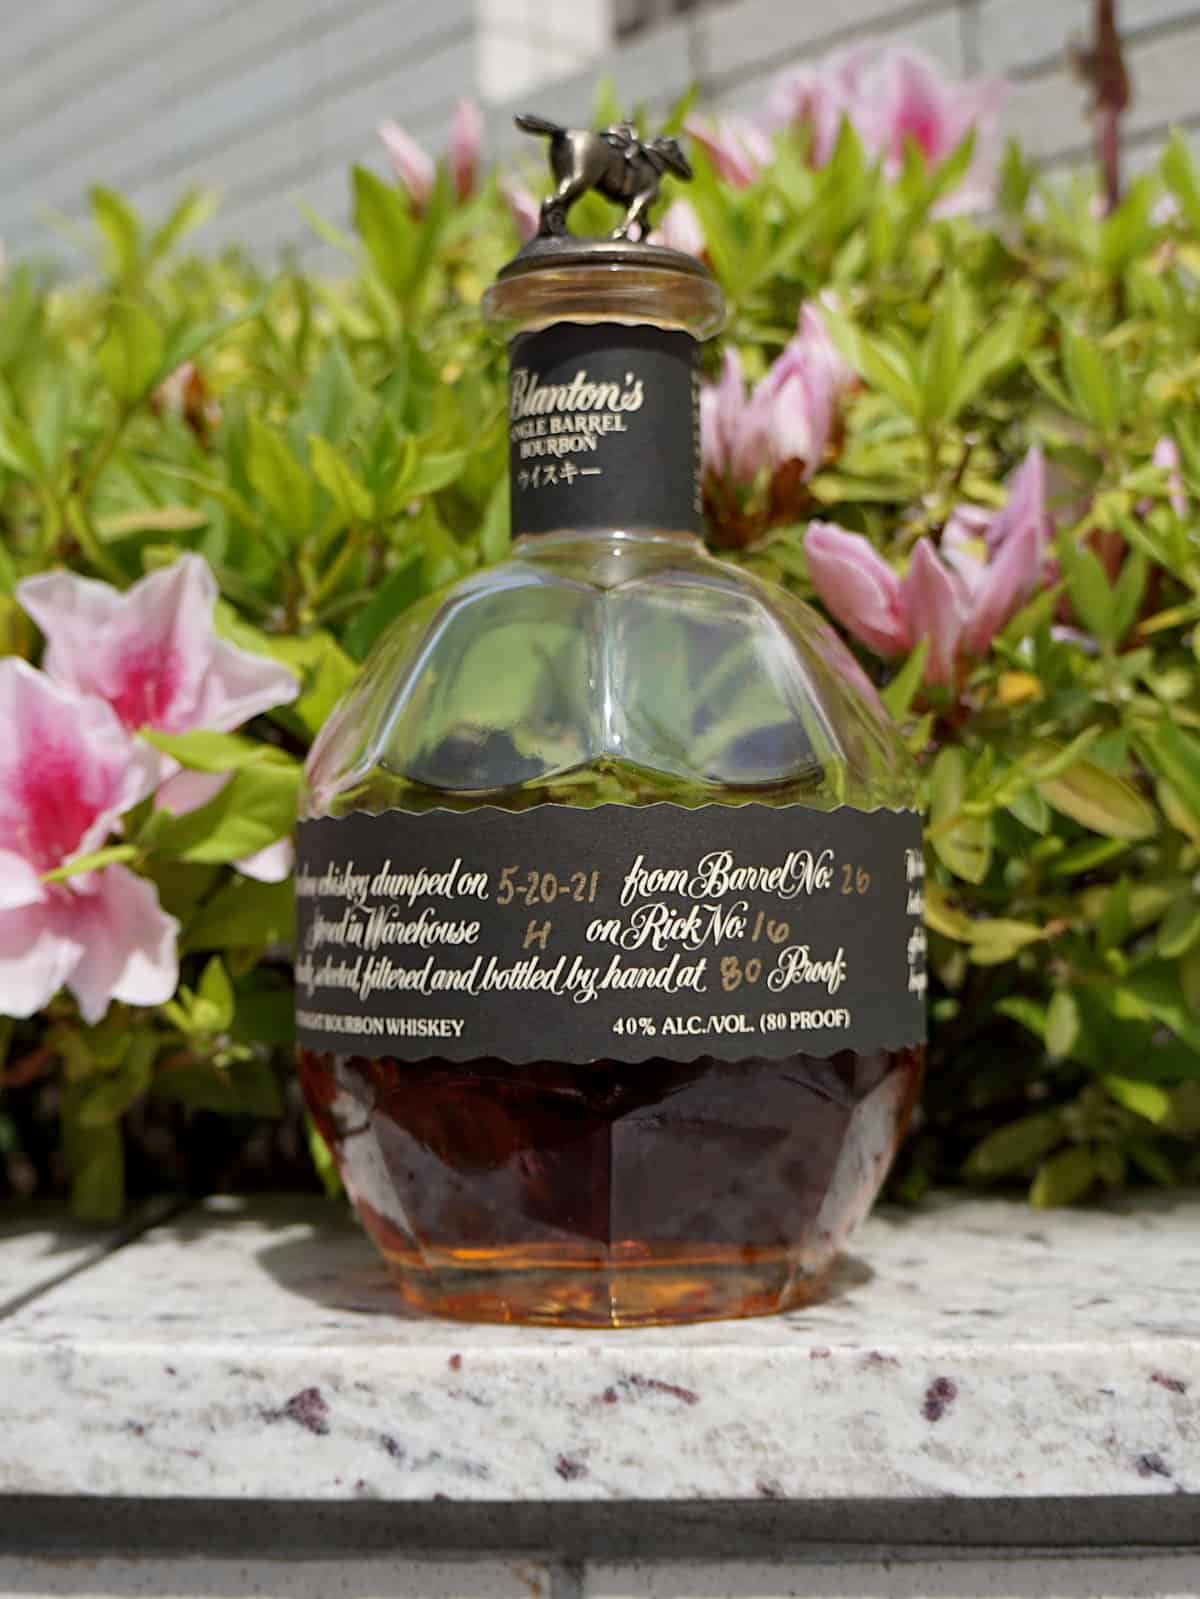 blanton’s black review featured